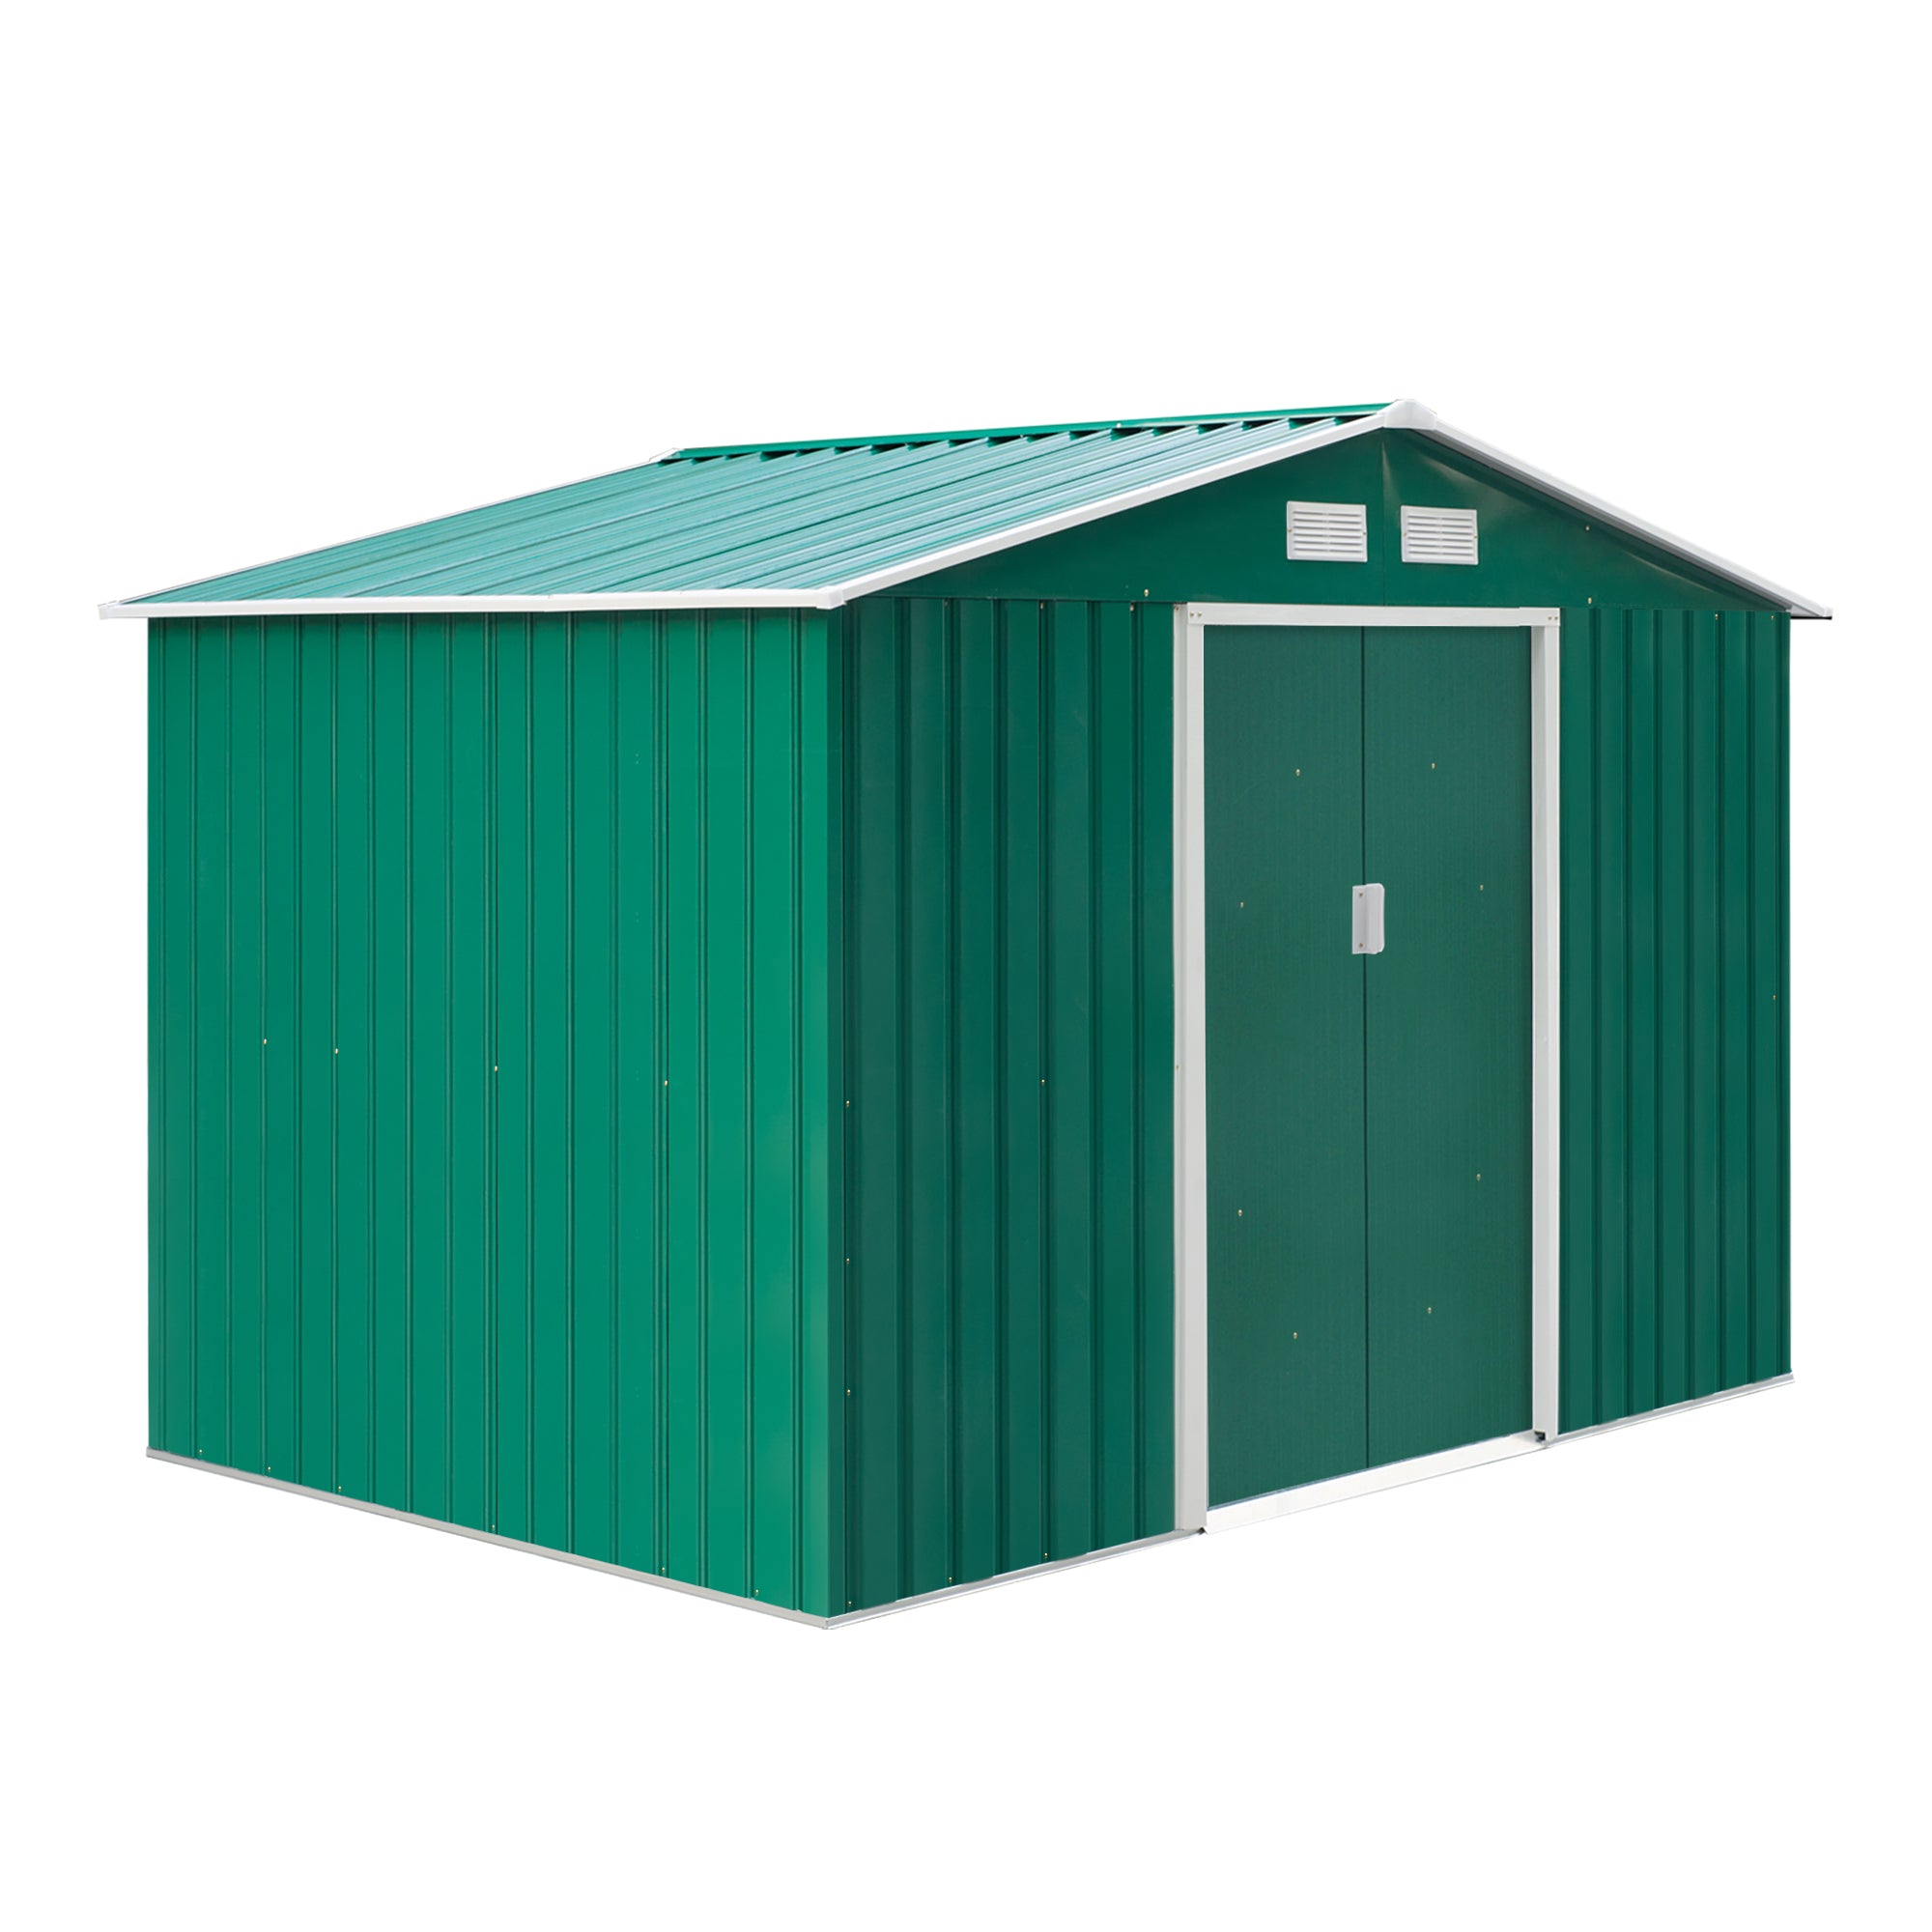 Outsunny  Galvanised Metal Garden Shed   9ft  X 6ft - Green  | TJ Hughes